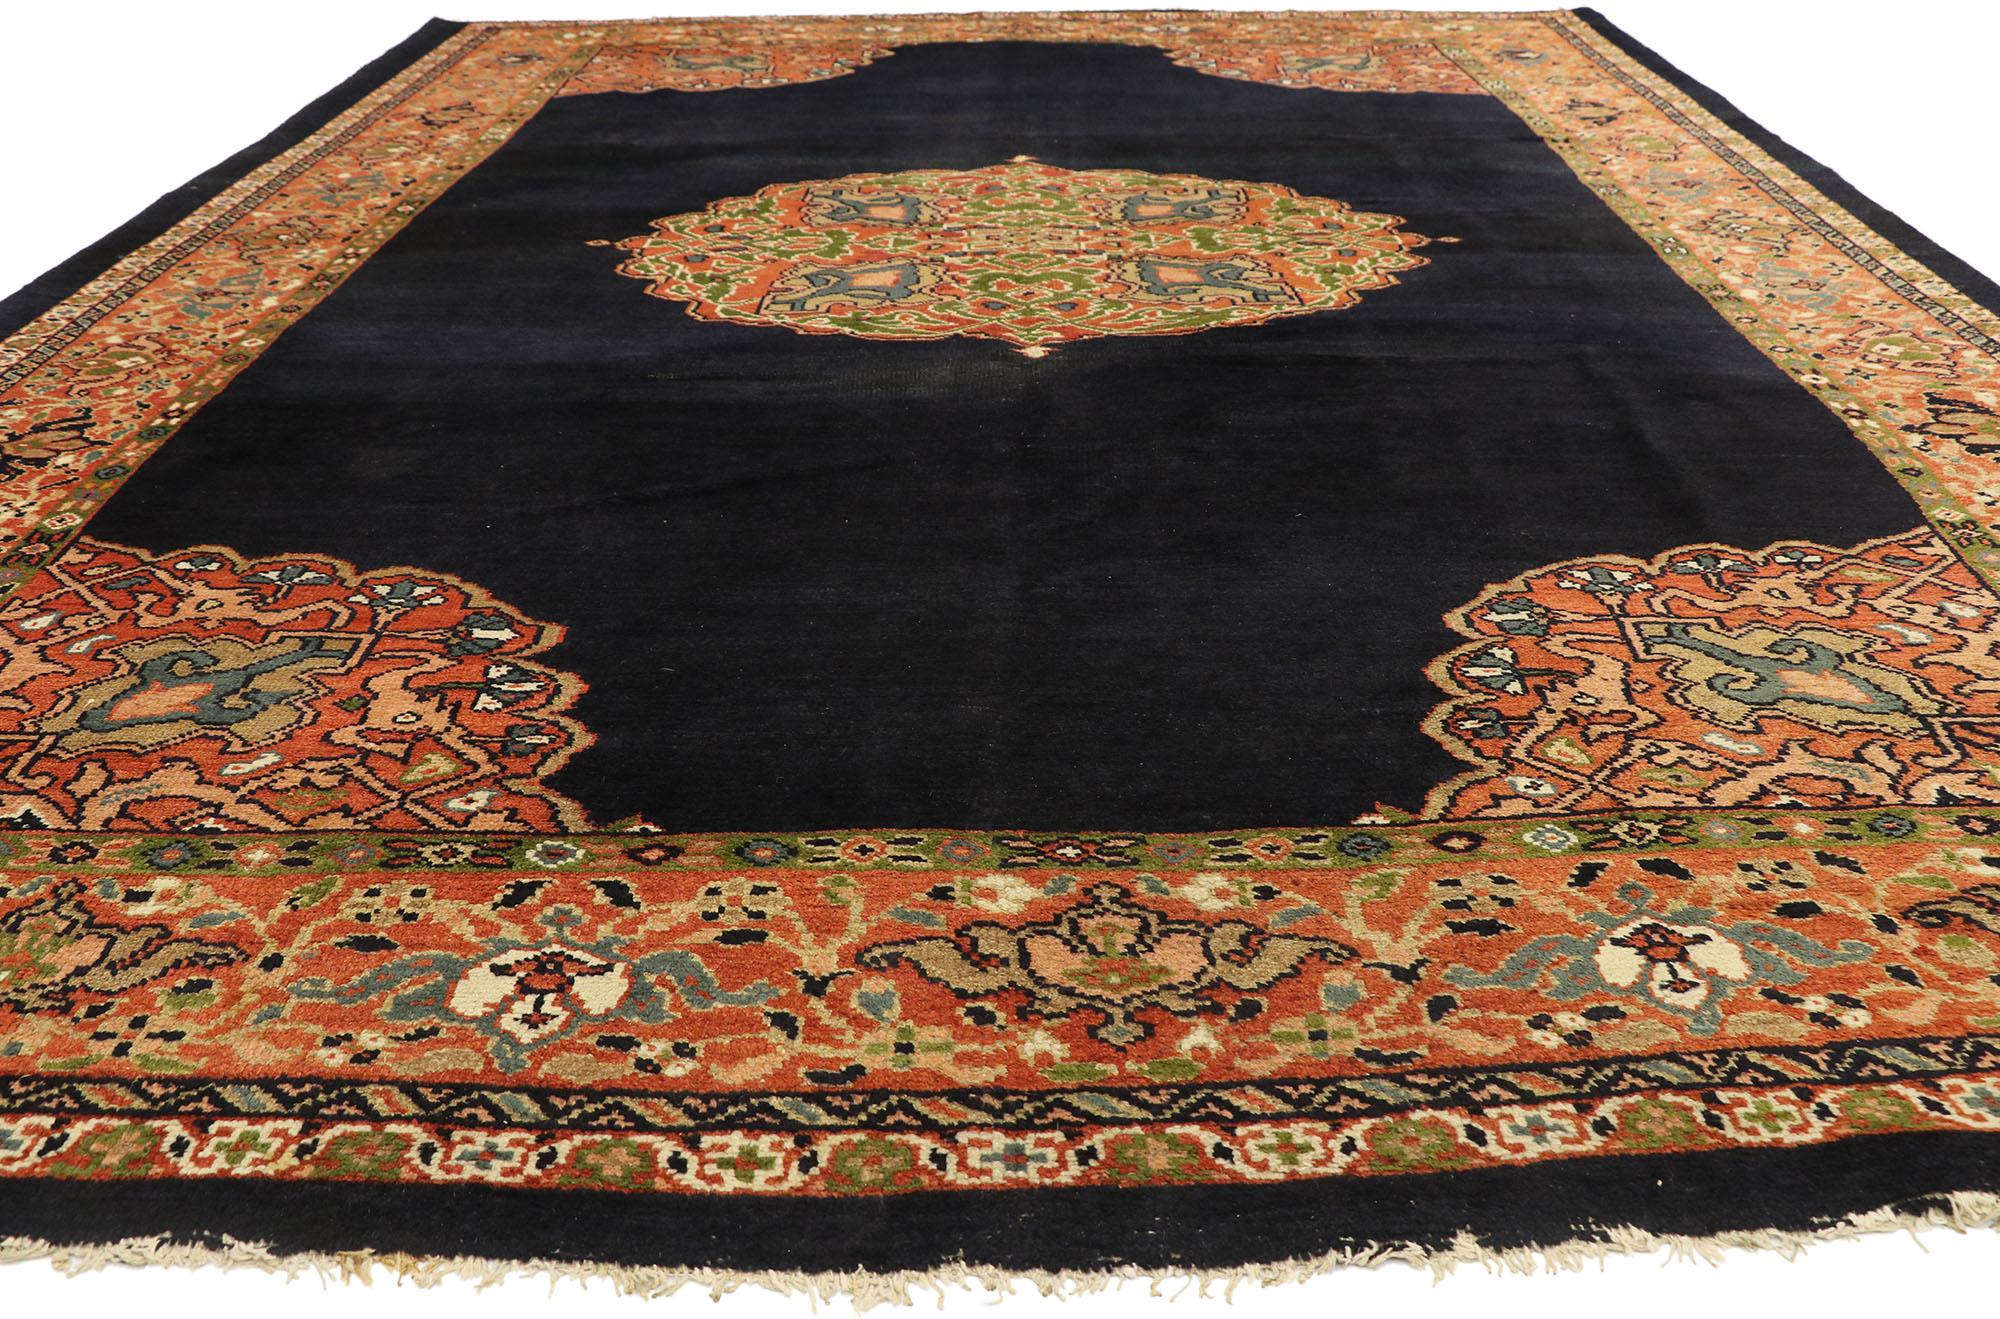 Late 19th Century Antique Persian Sultanabad Rug with Modern Jacobean Style In Good Condition For Sale In Dallas, TX